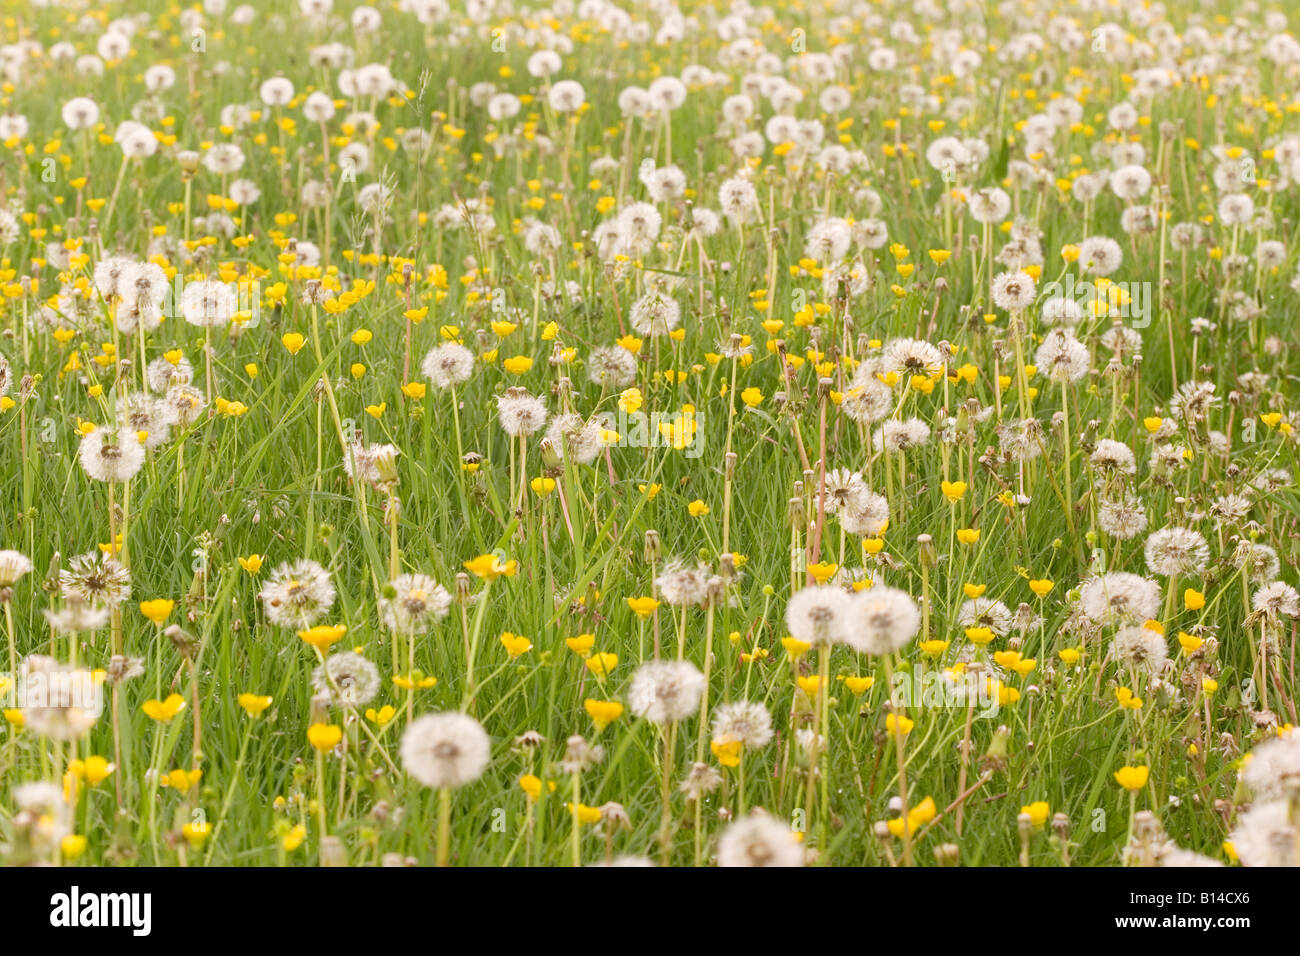 A field of dandelions and buttercups Stock Photo